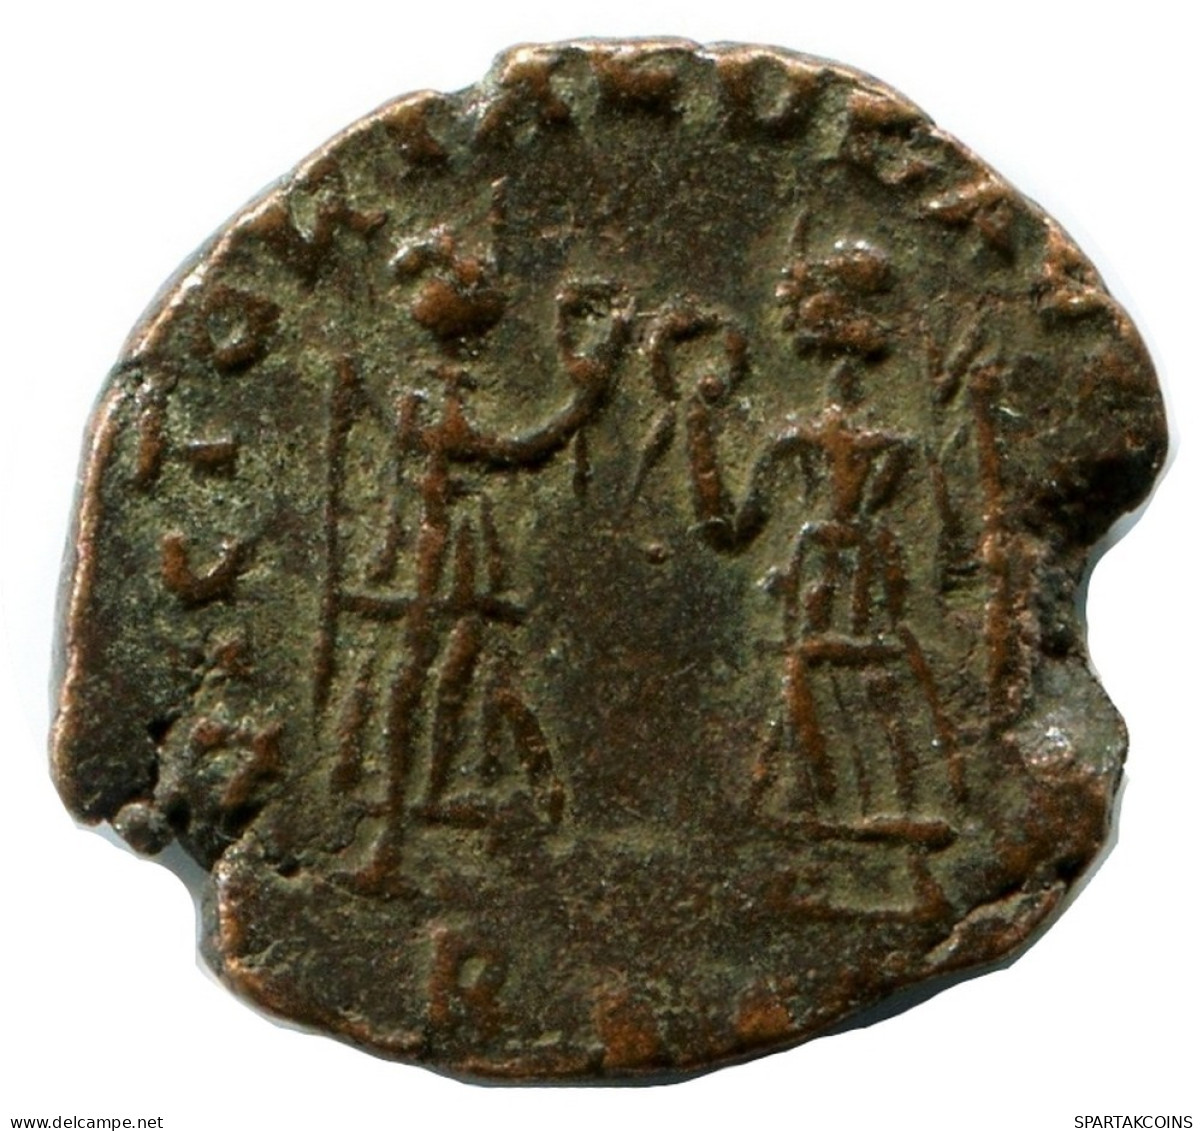 CONSTANS MINTED IN ROME ITALY FROM THE ROYAL ONTARIO MUSEUM #ANC11528.14.U.A - L'Empire Chrétien (307 à 363)